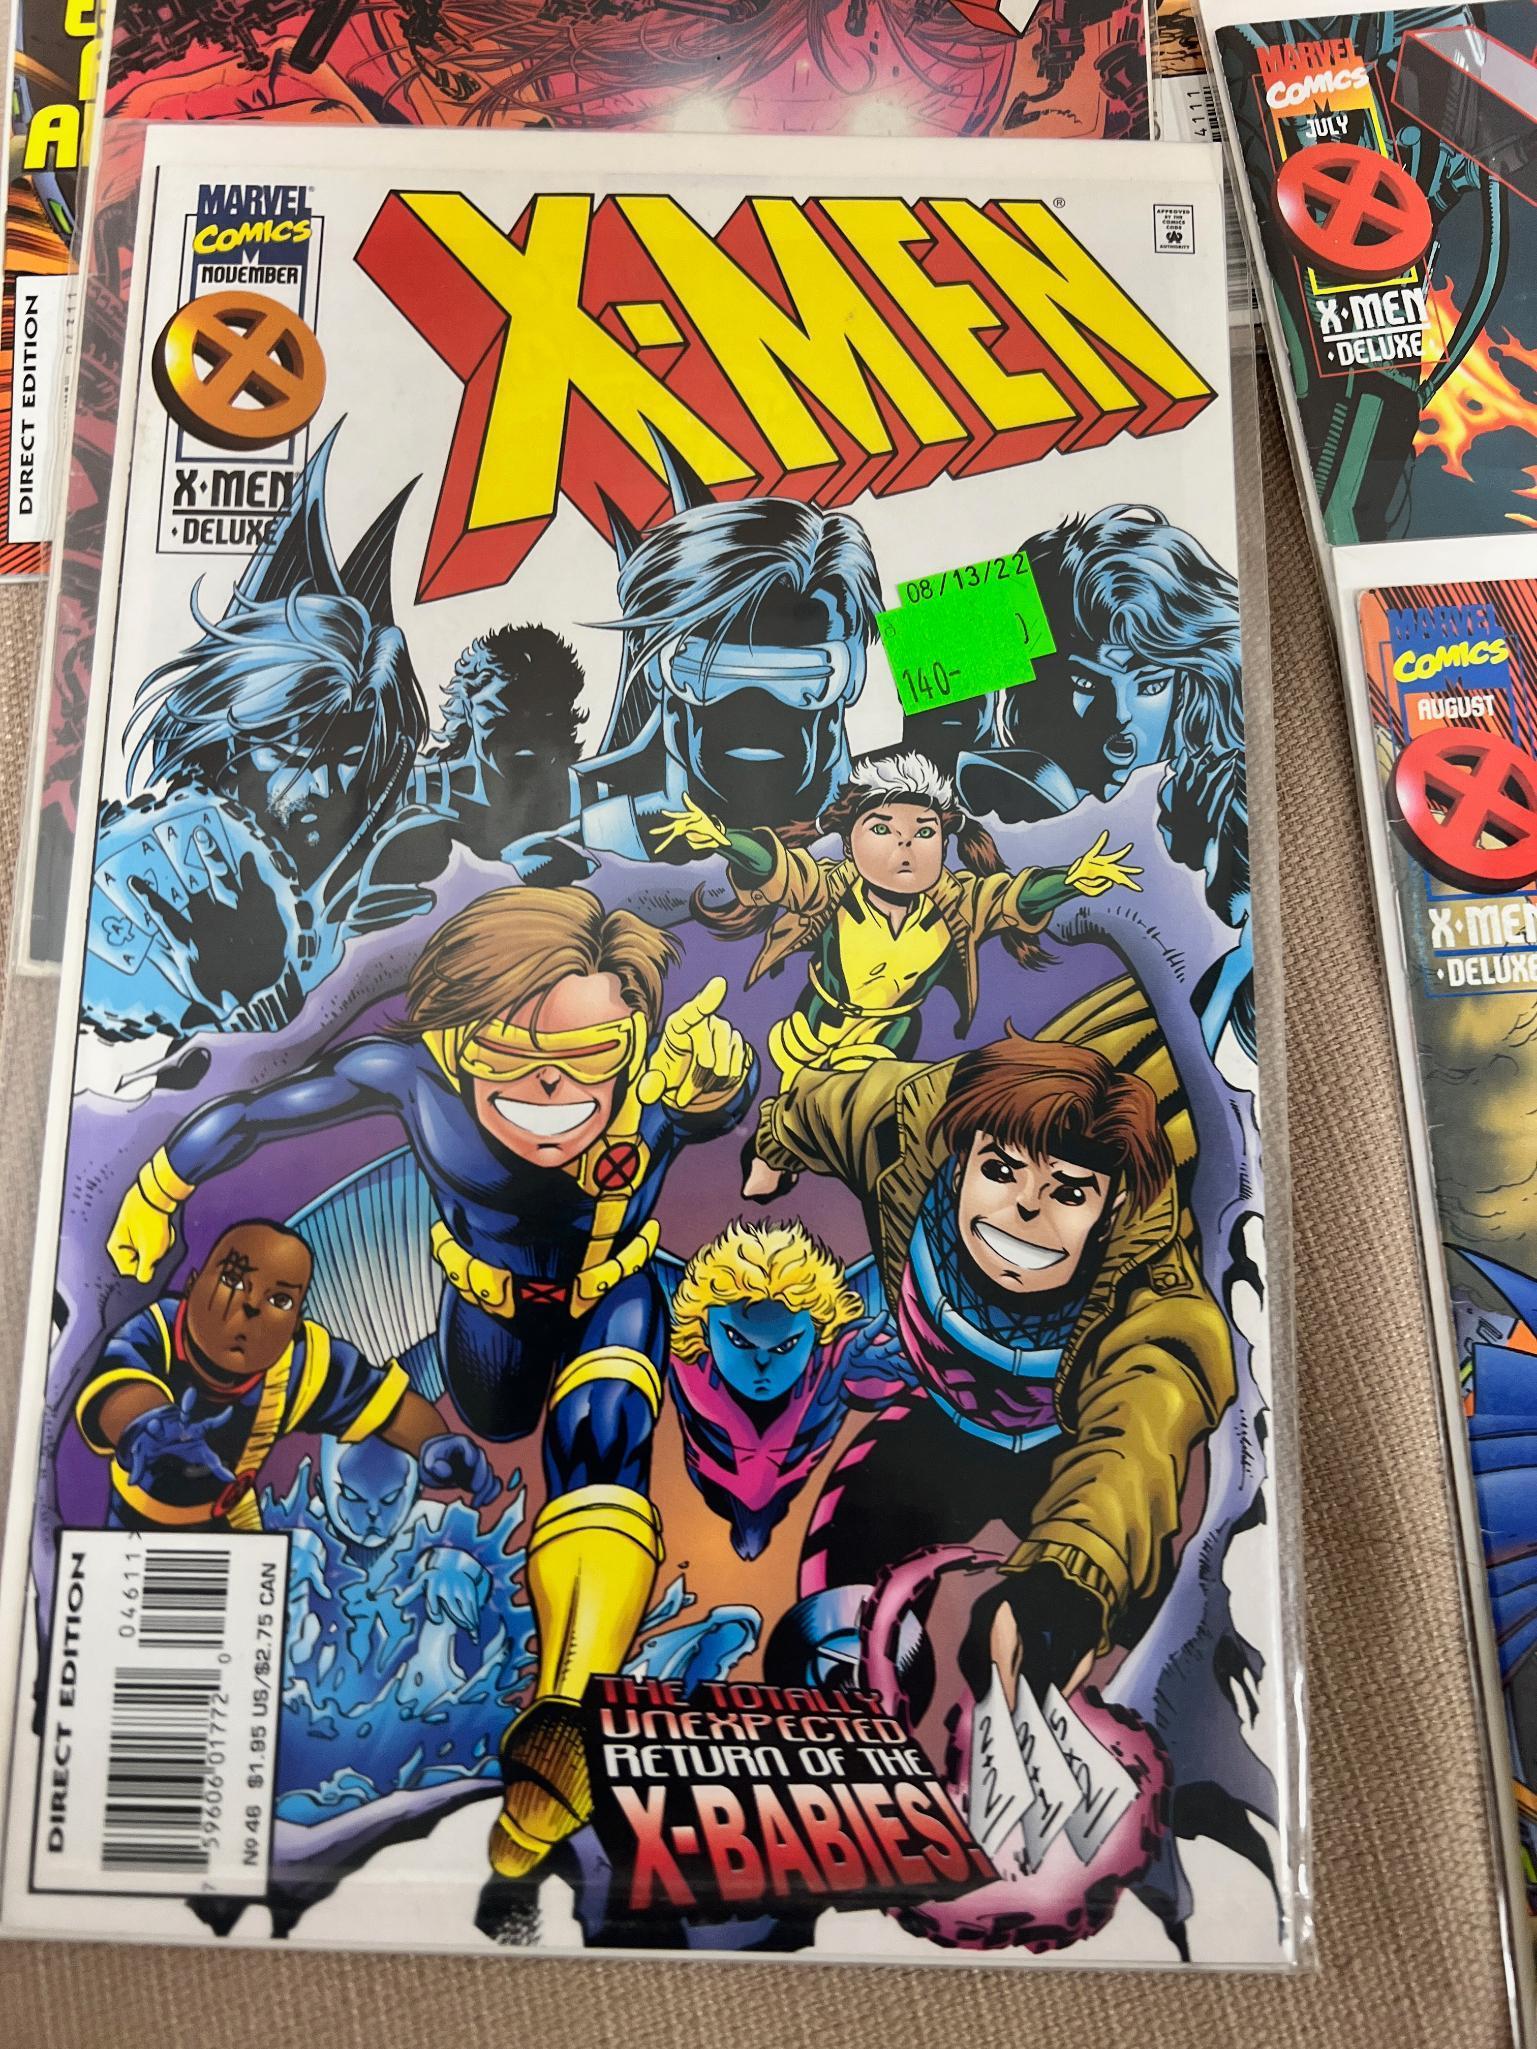 20 X-Men Comic Books, 29-41 + 7 Deluxe including 1st Appearance of Synch